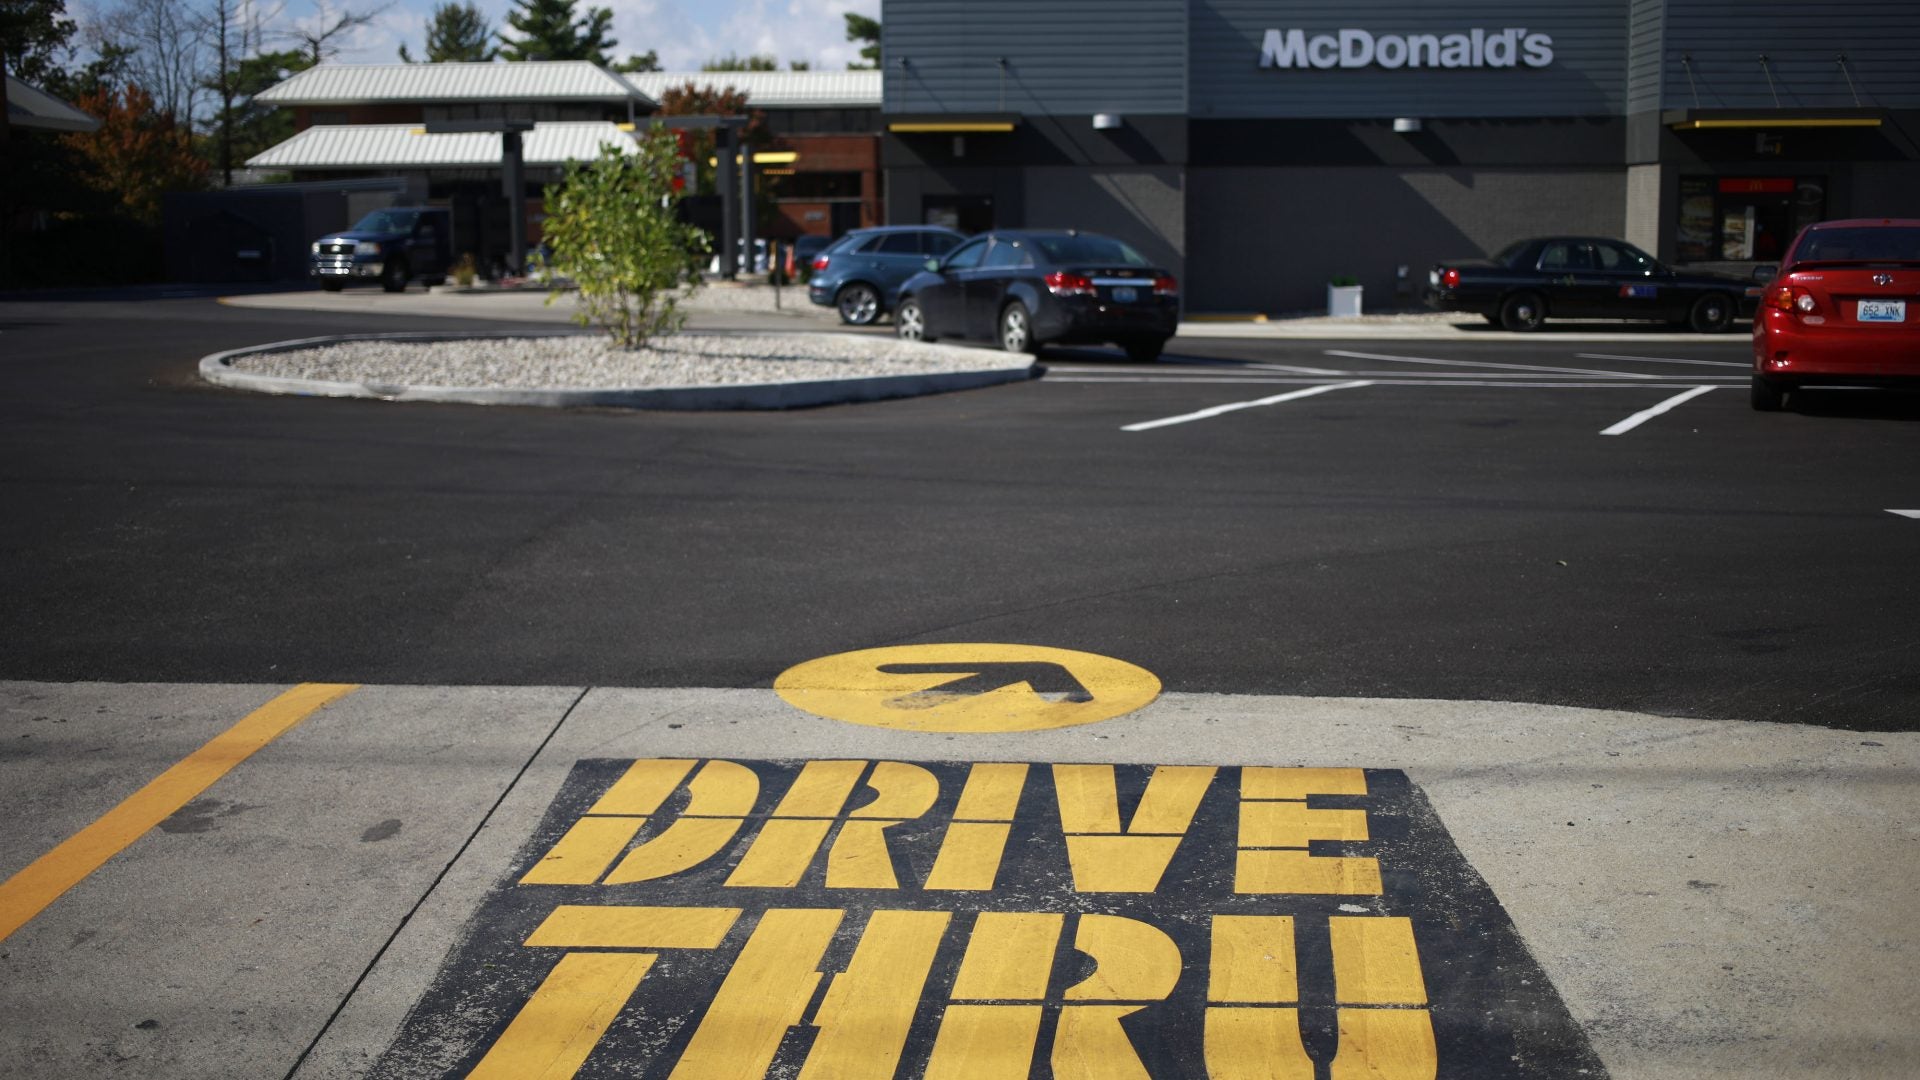 McDonald’s Partnering With IBM To Develop More Automated Drive-Thru Lanes